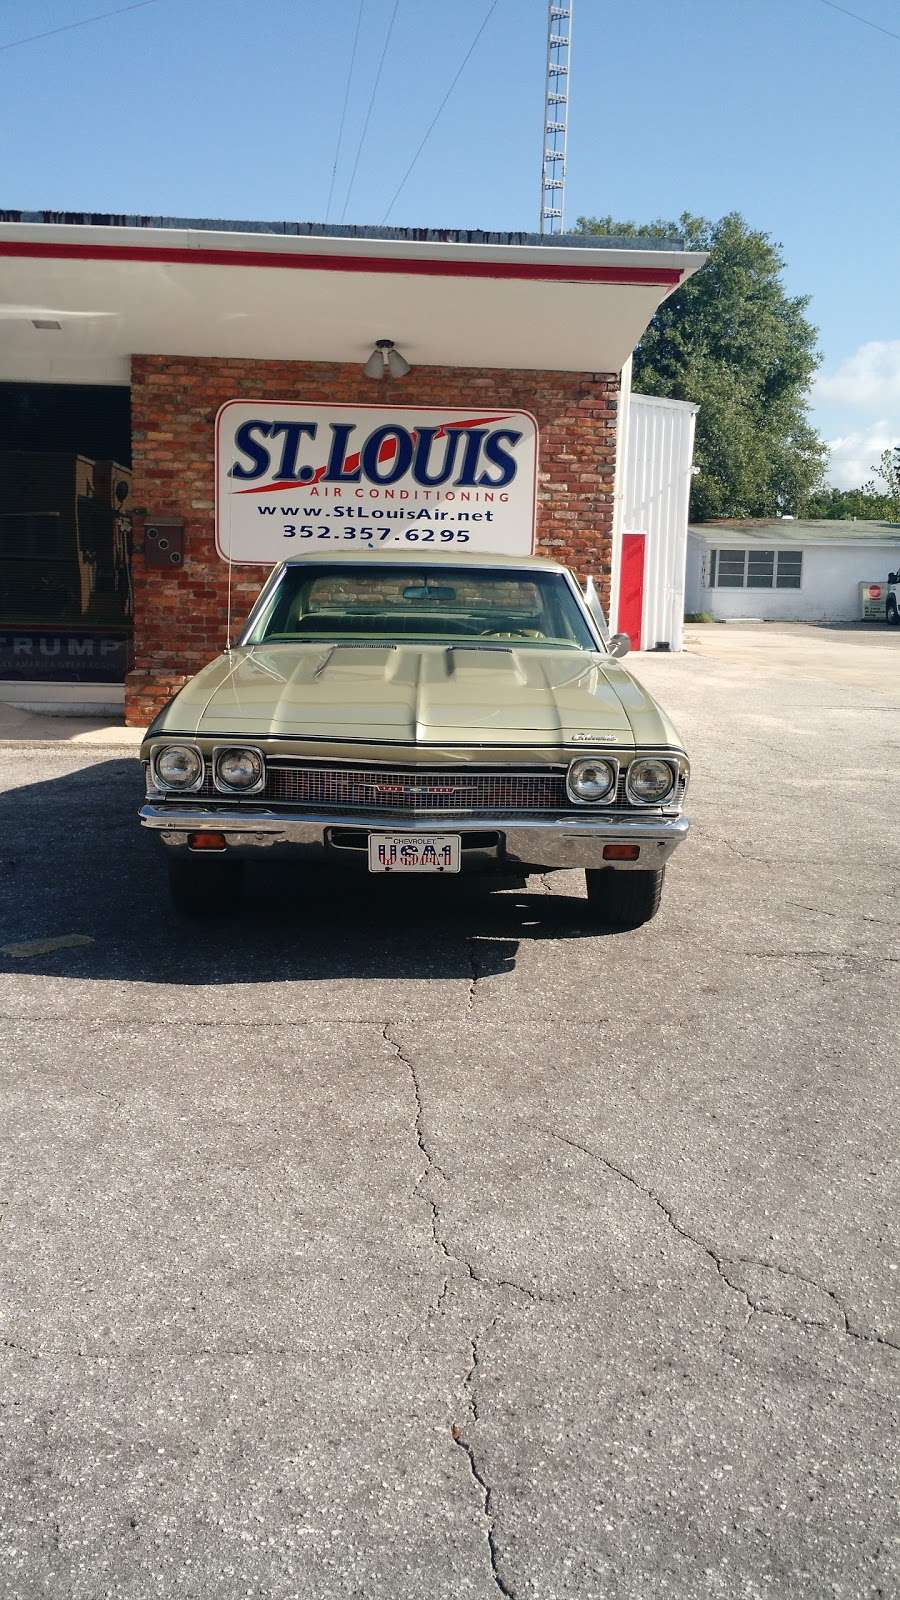 St. Louis Air Conditioning | 33 E Golf Links Ave, Eustis, FL 32726 | Phone: (352) 357-6295